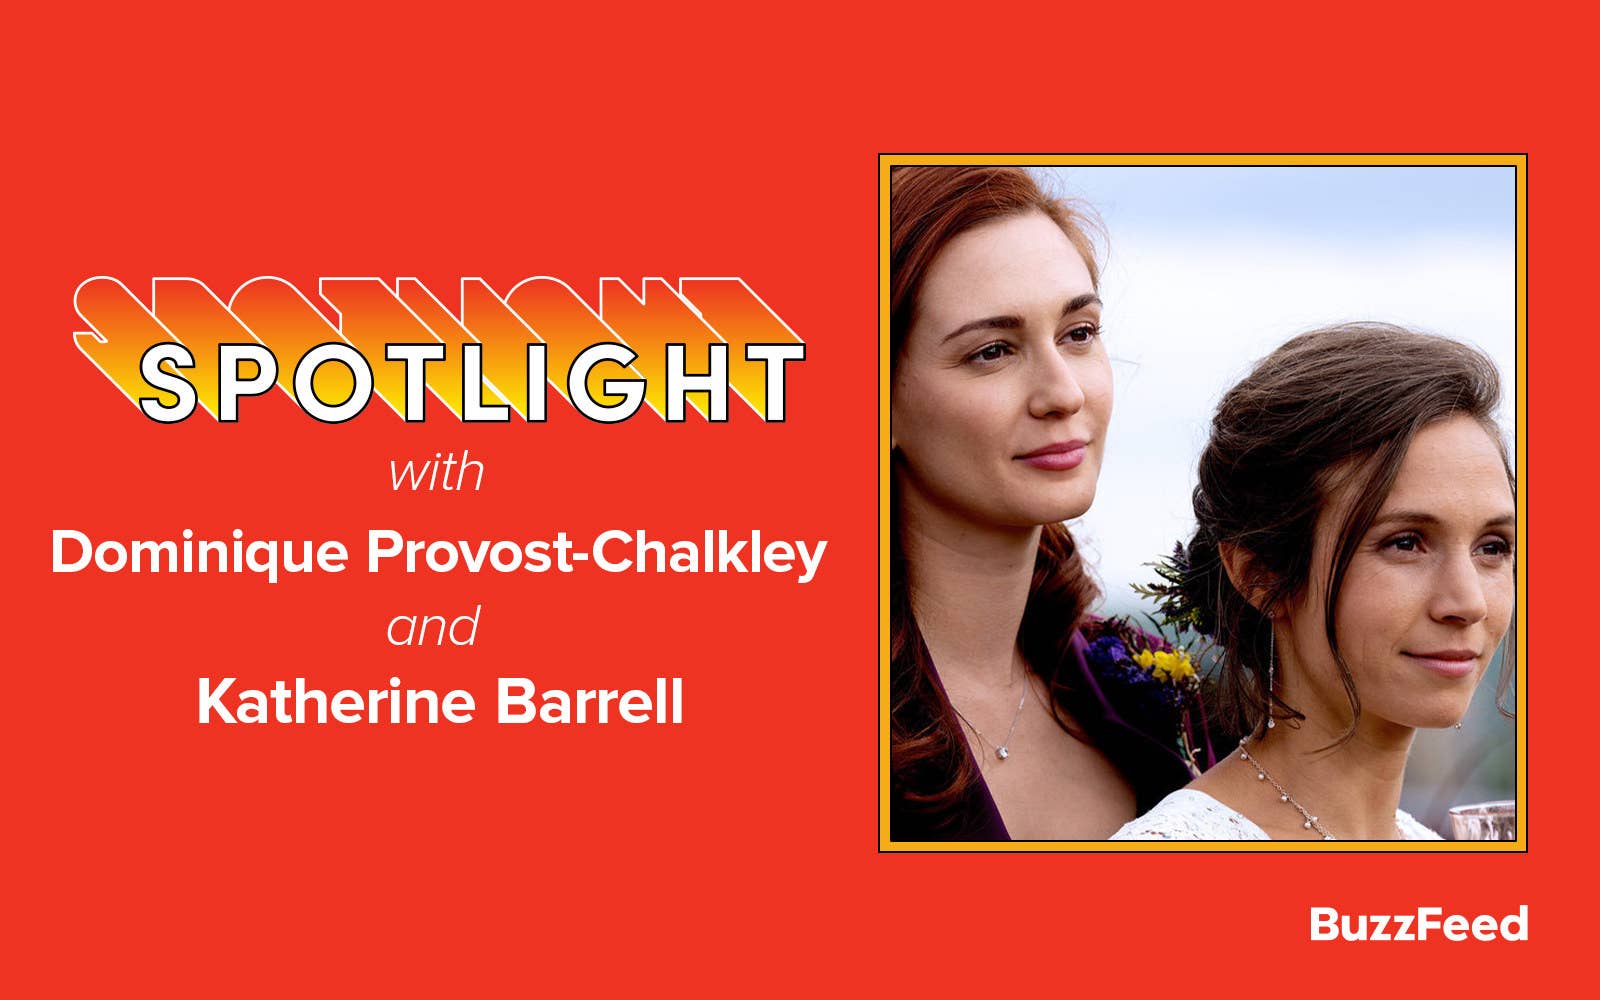 A header reading, &quot;Spotlight with Dominique Provost-Chalkley and Katherine Barrell&quot;